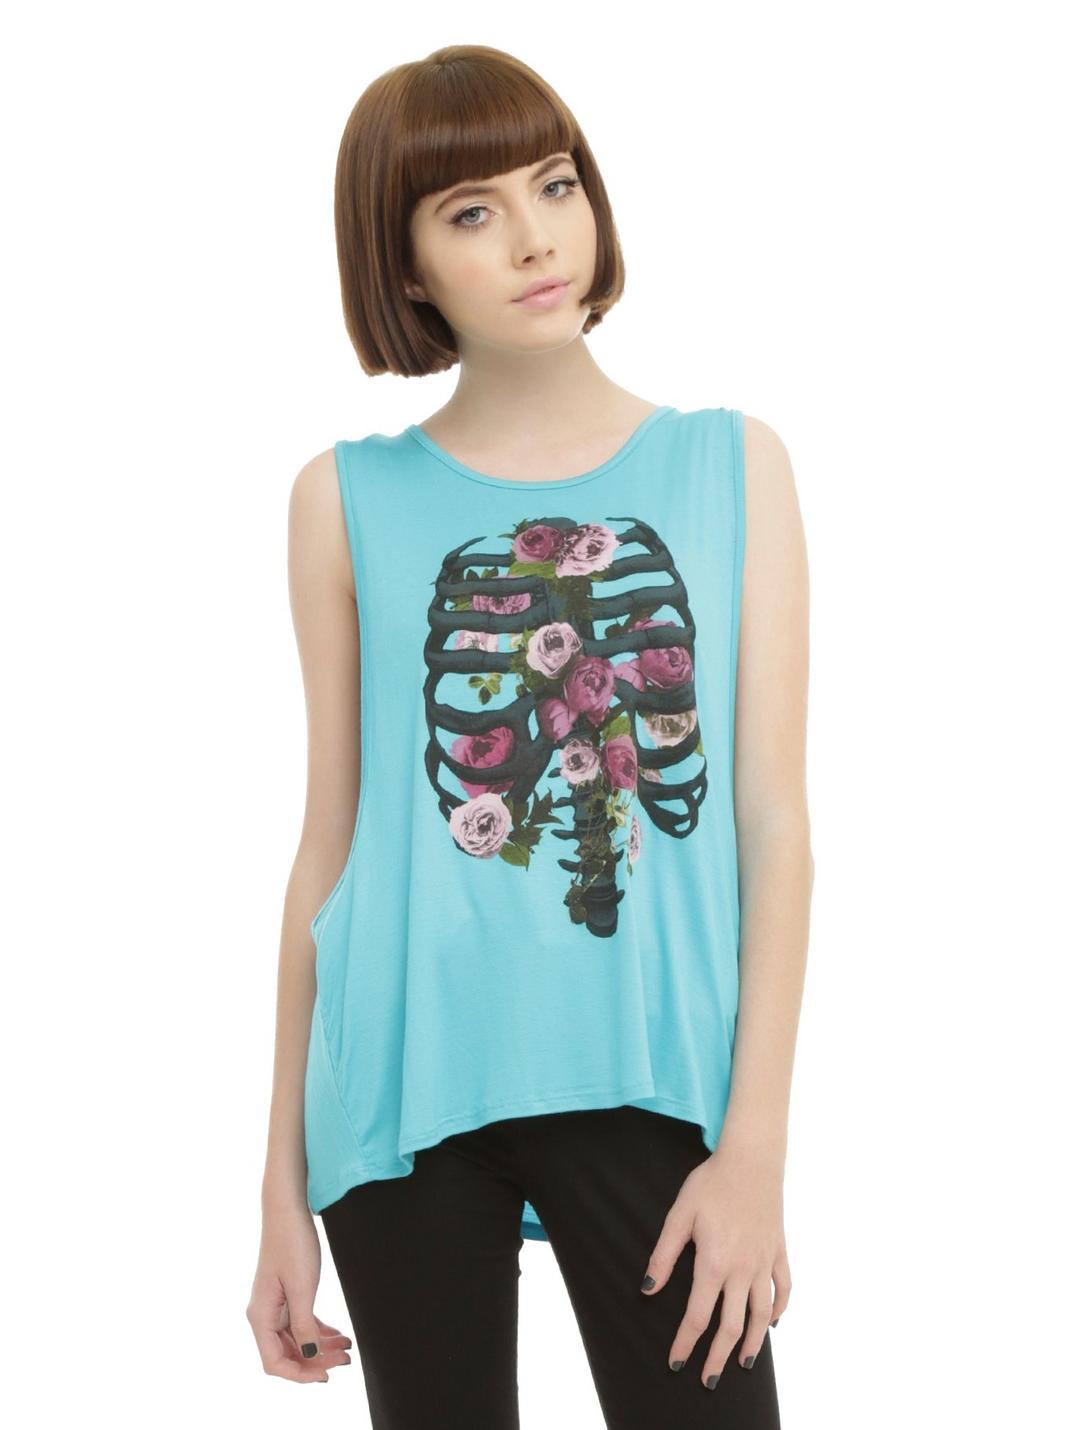 Rib Cage Floral Drop Arm Girls Tank Top, TURQUOISE, hi-res